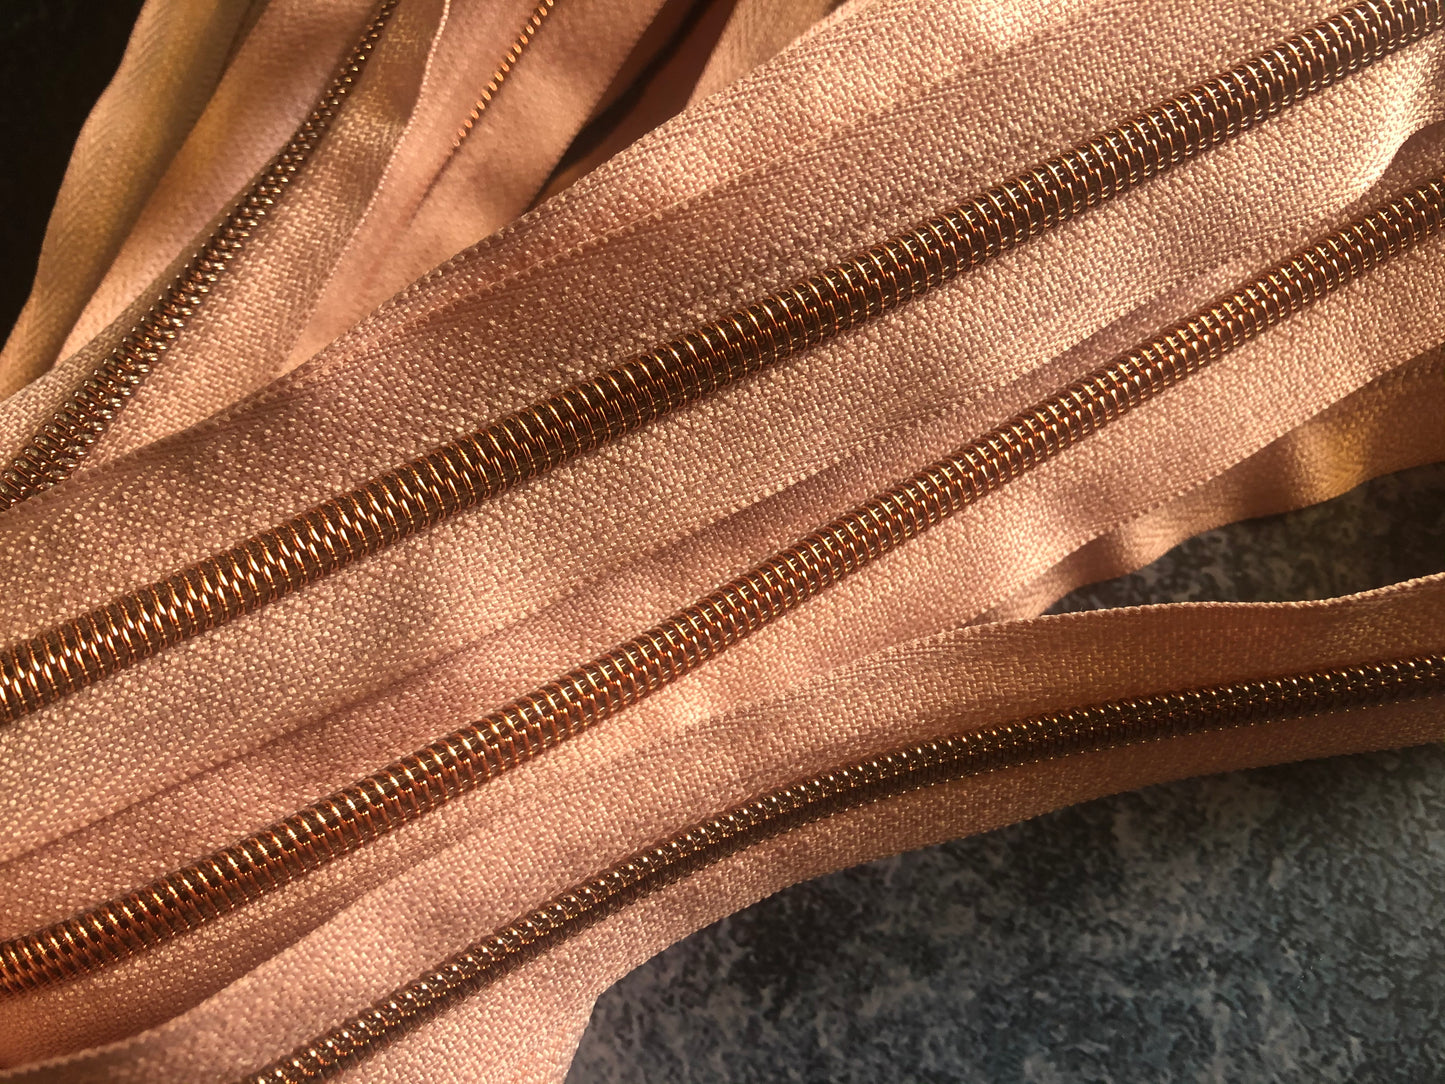 Rose gold teeth size 5 zipper tapes, coil zipper tapes, nylon zipper tapes by the metre